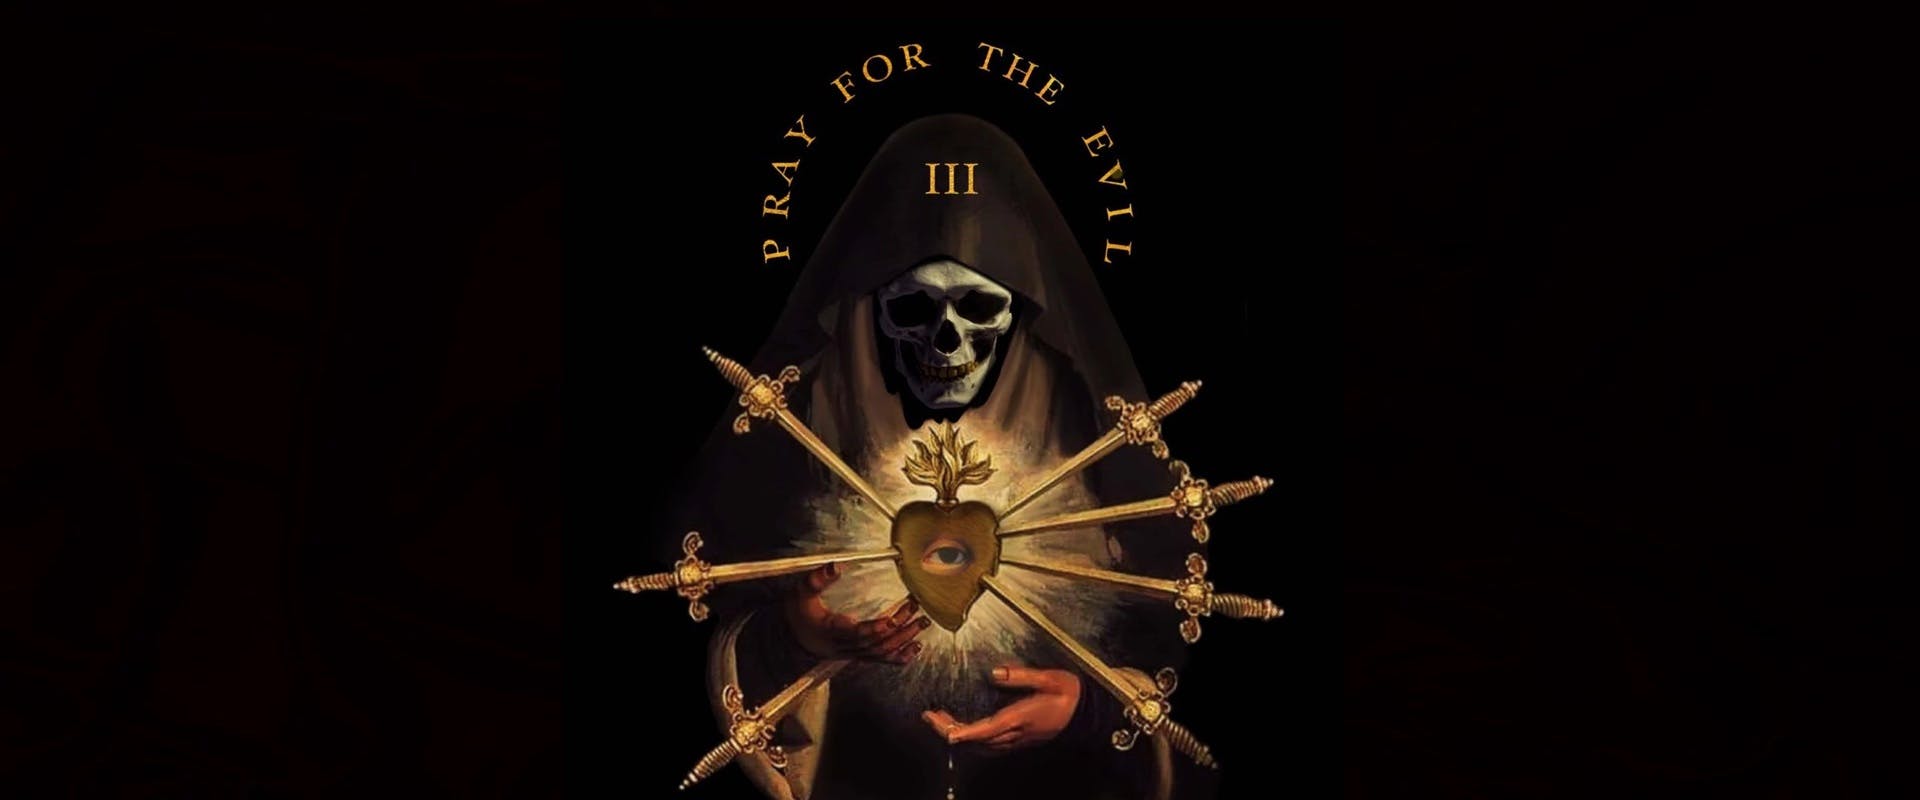 PRAY FOR THE EVIL III - FREE LORD AND MEPHUX